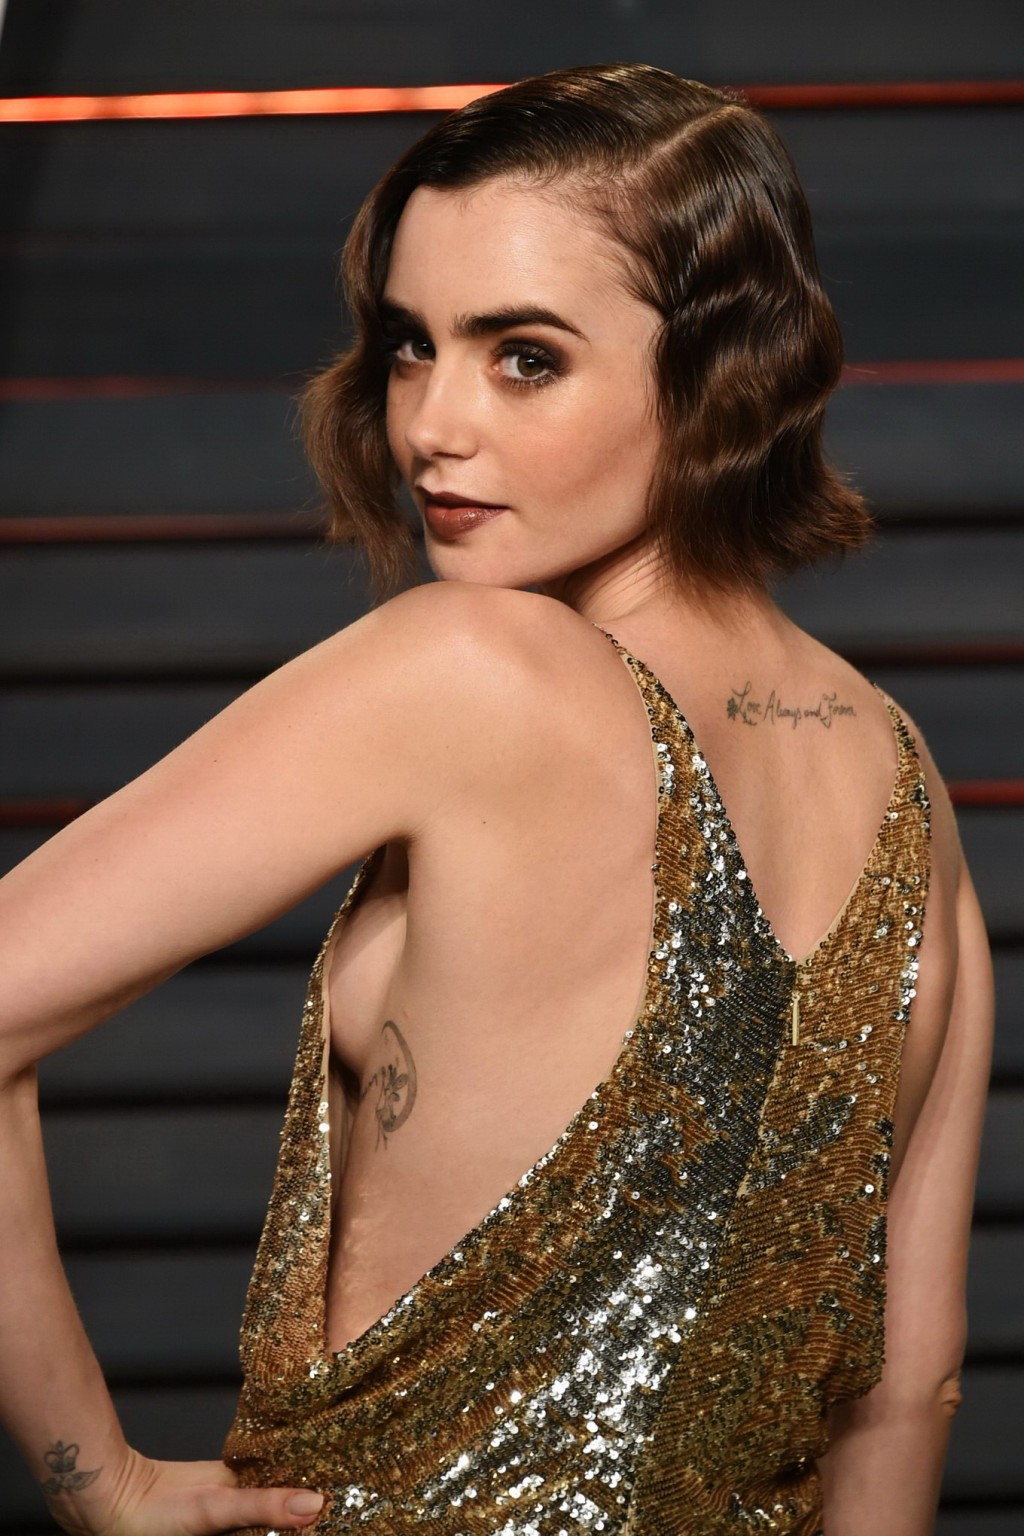 Lily Collins showing sideboob huge cleavage and legs #75145306